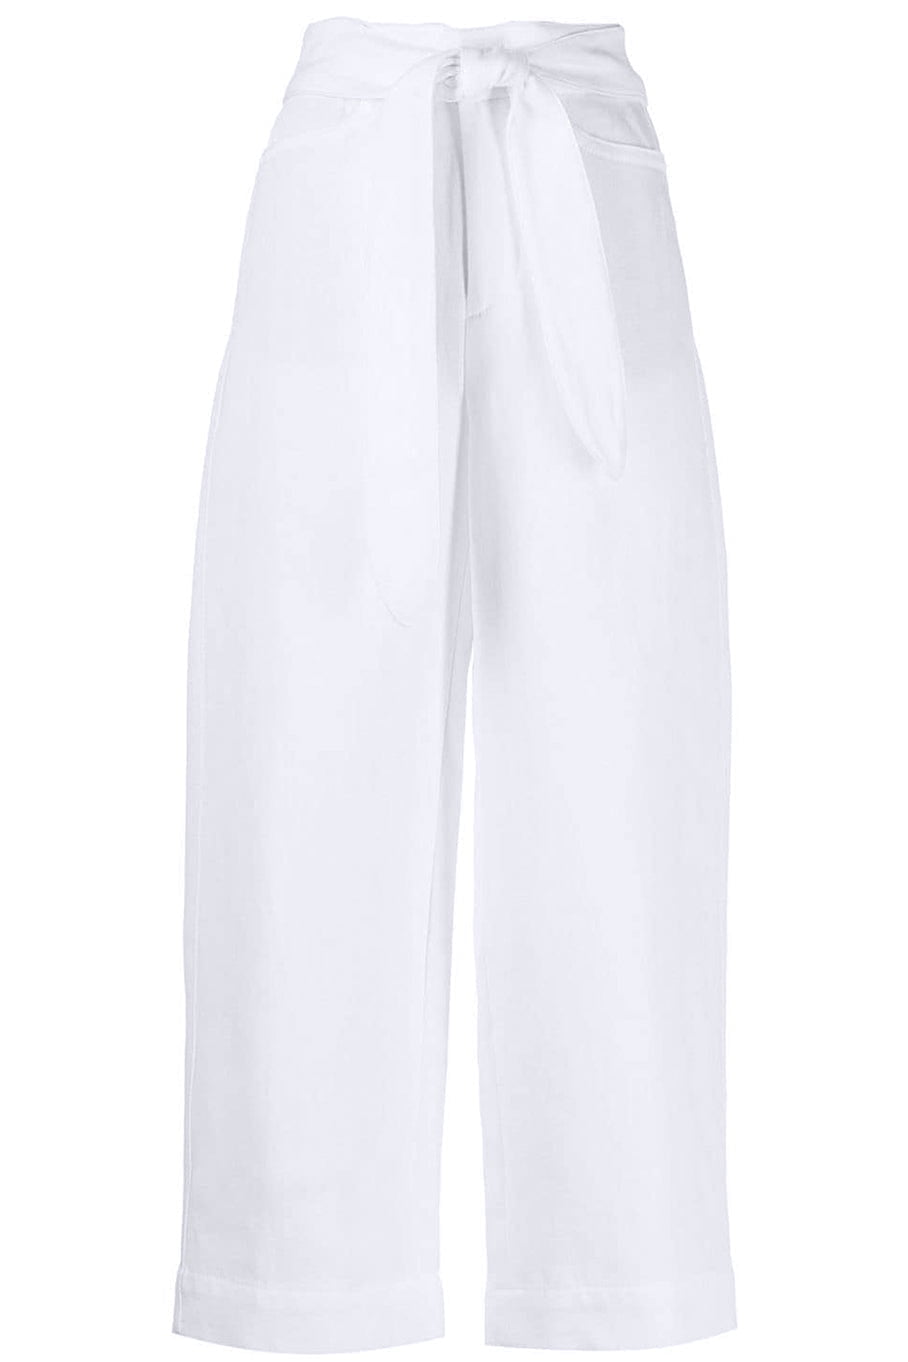 VINCE-Tie Front Pull On Pant-